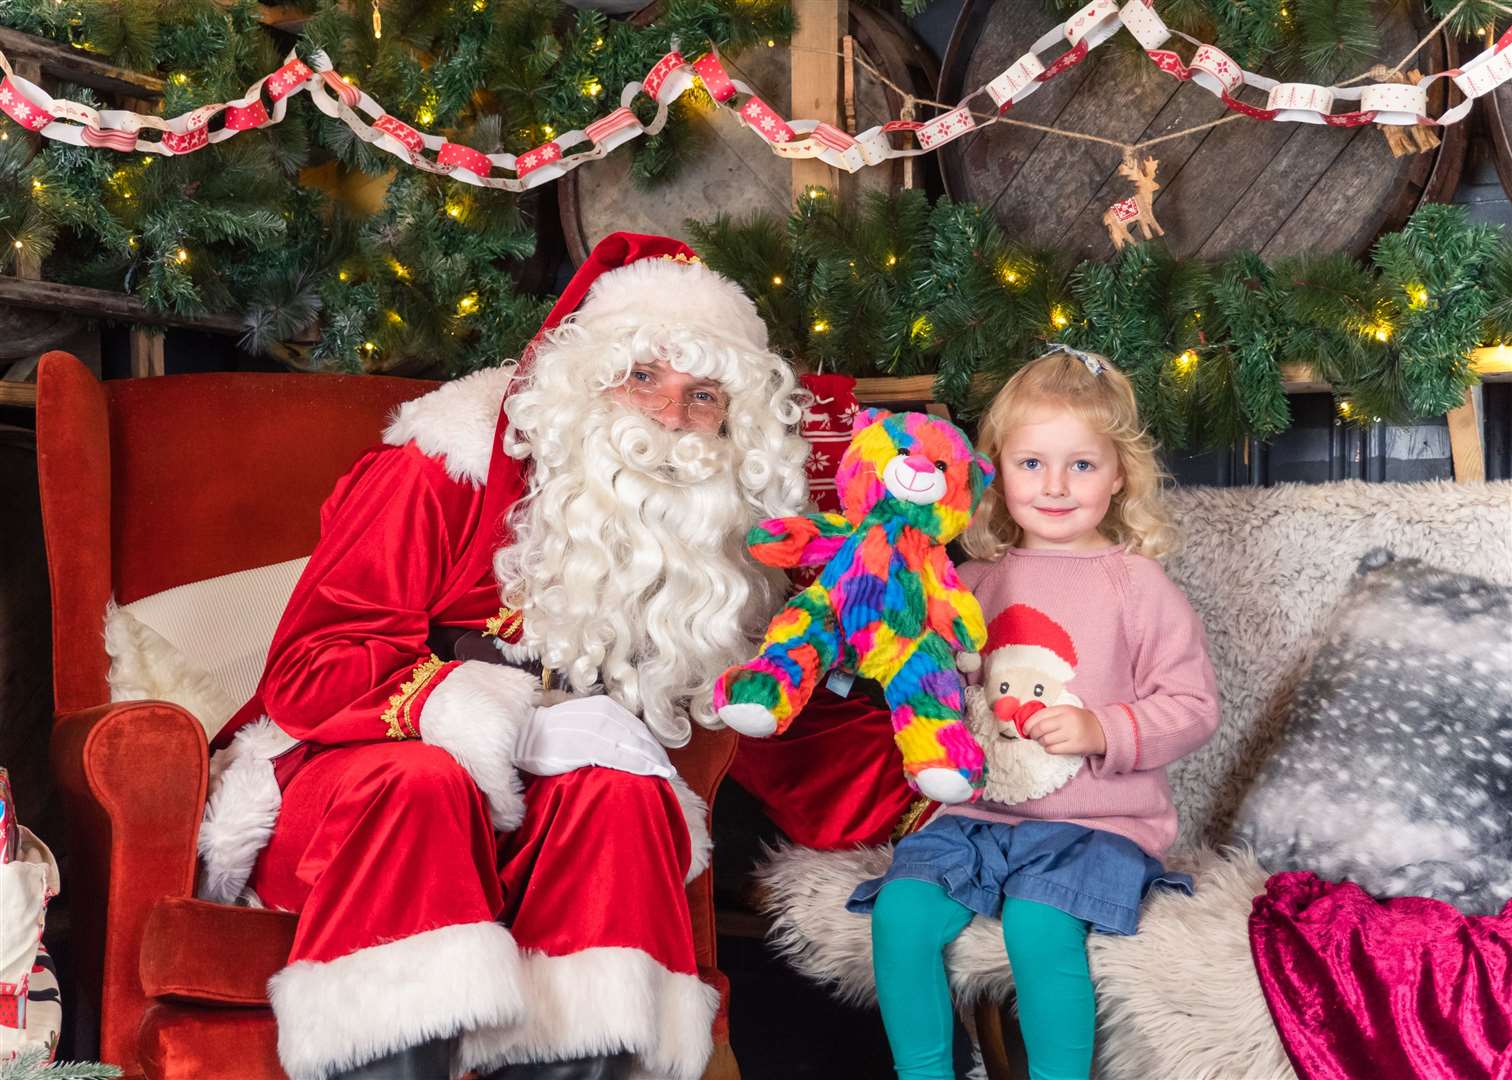 Meet Santa, his elves and even personalise your gift